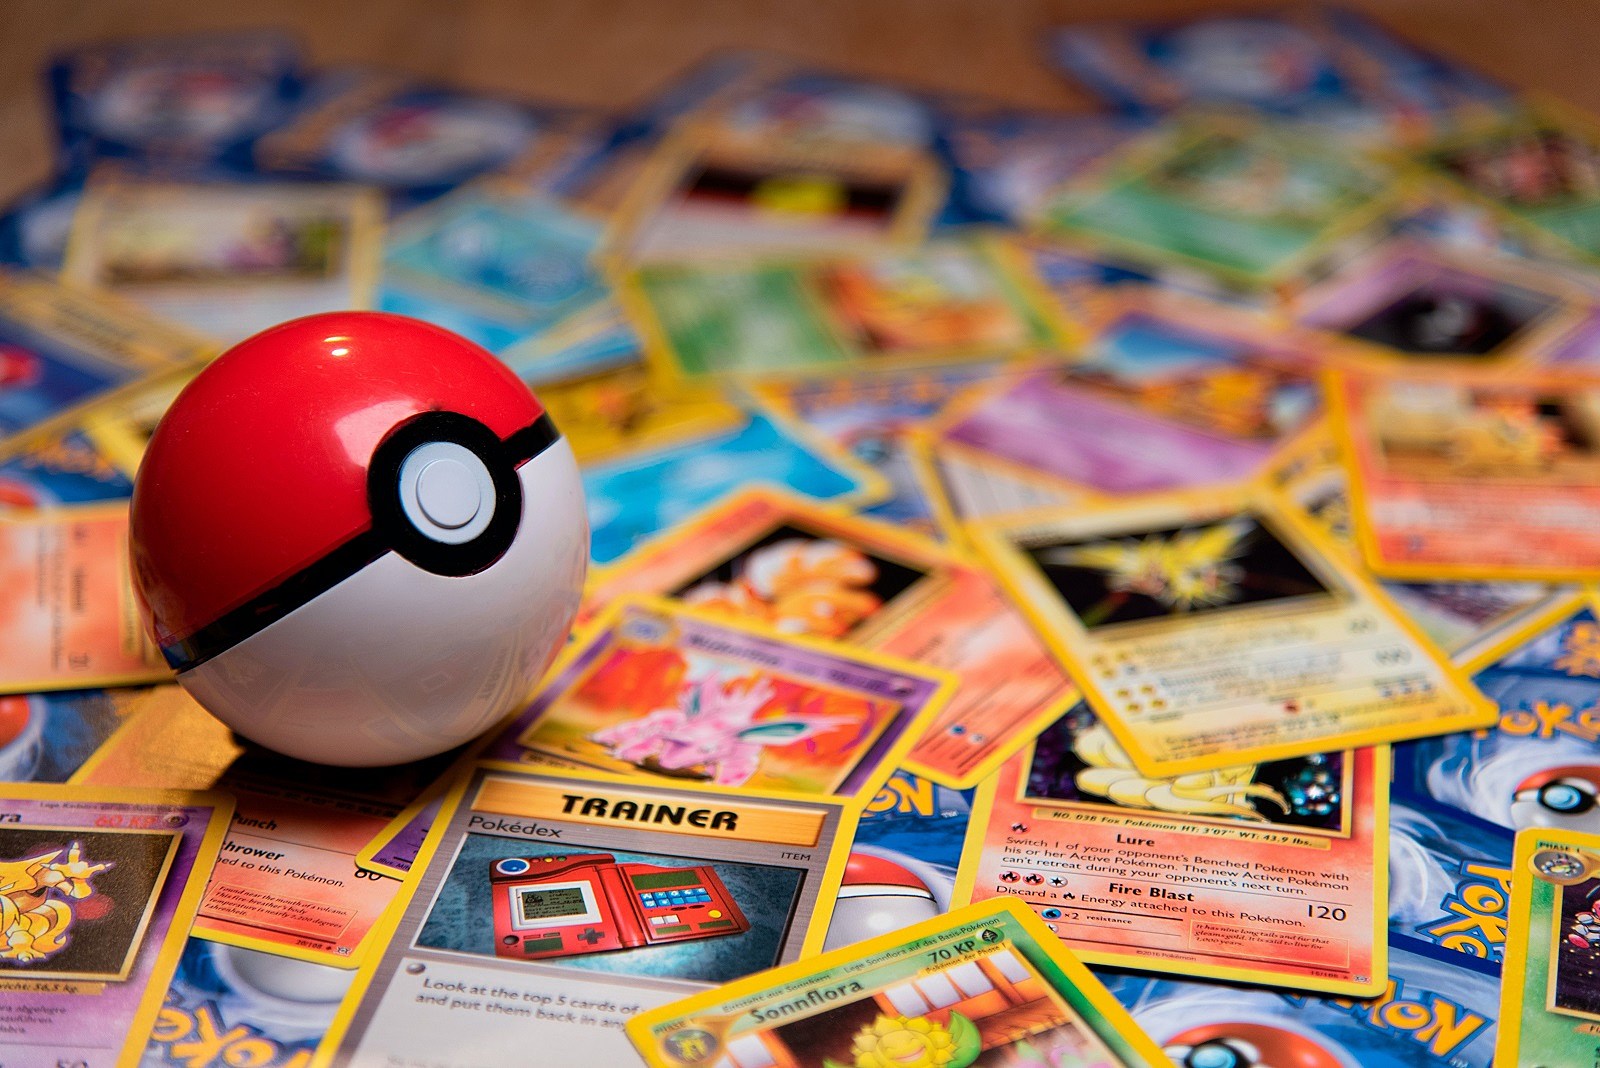 Pokémon Cards: Where You Can "Catch 'Em All" In The Lansing Area